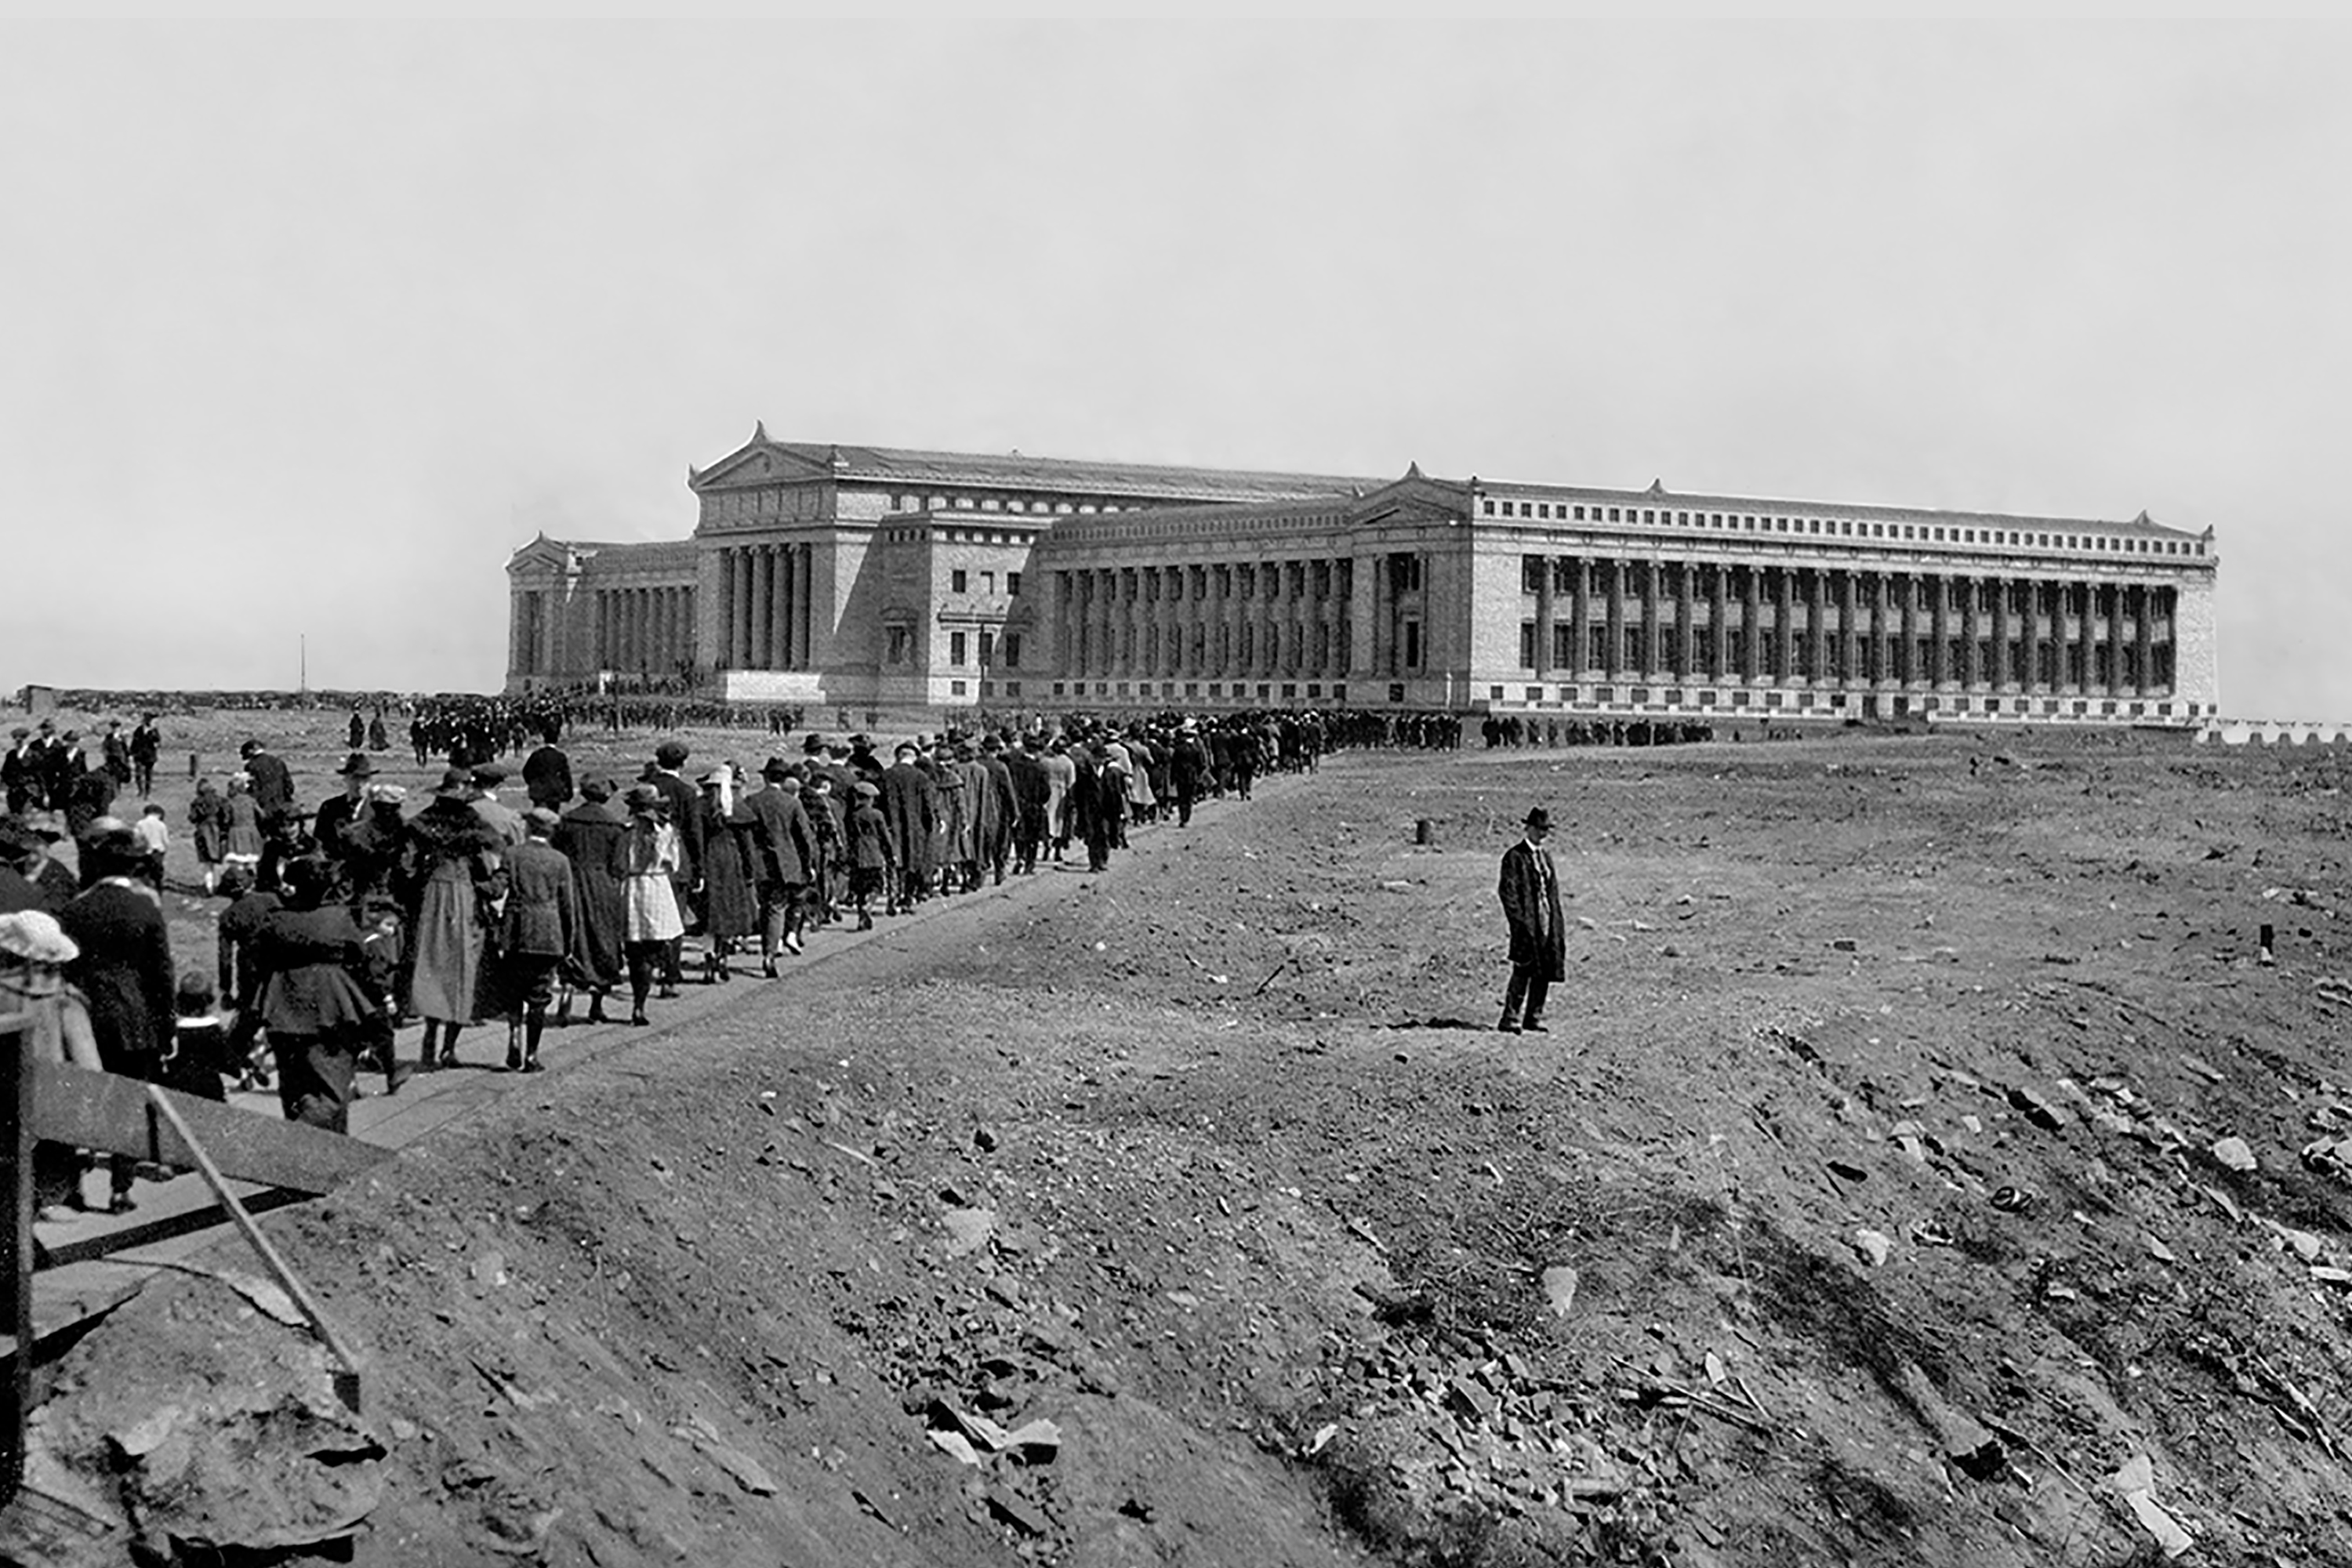 Crowds cross a wooden bridge and approach the Field Columbian Museum on opening day. A lone man stands to the side. The entire exterior view of the Museum’s north and west facades are visible in the background.